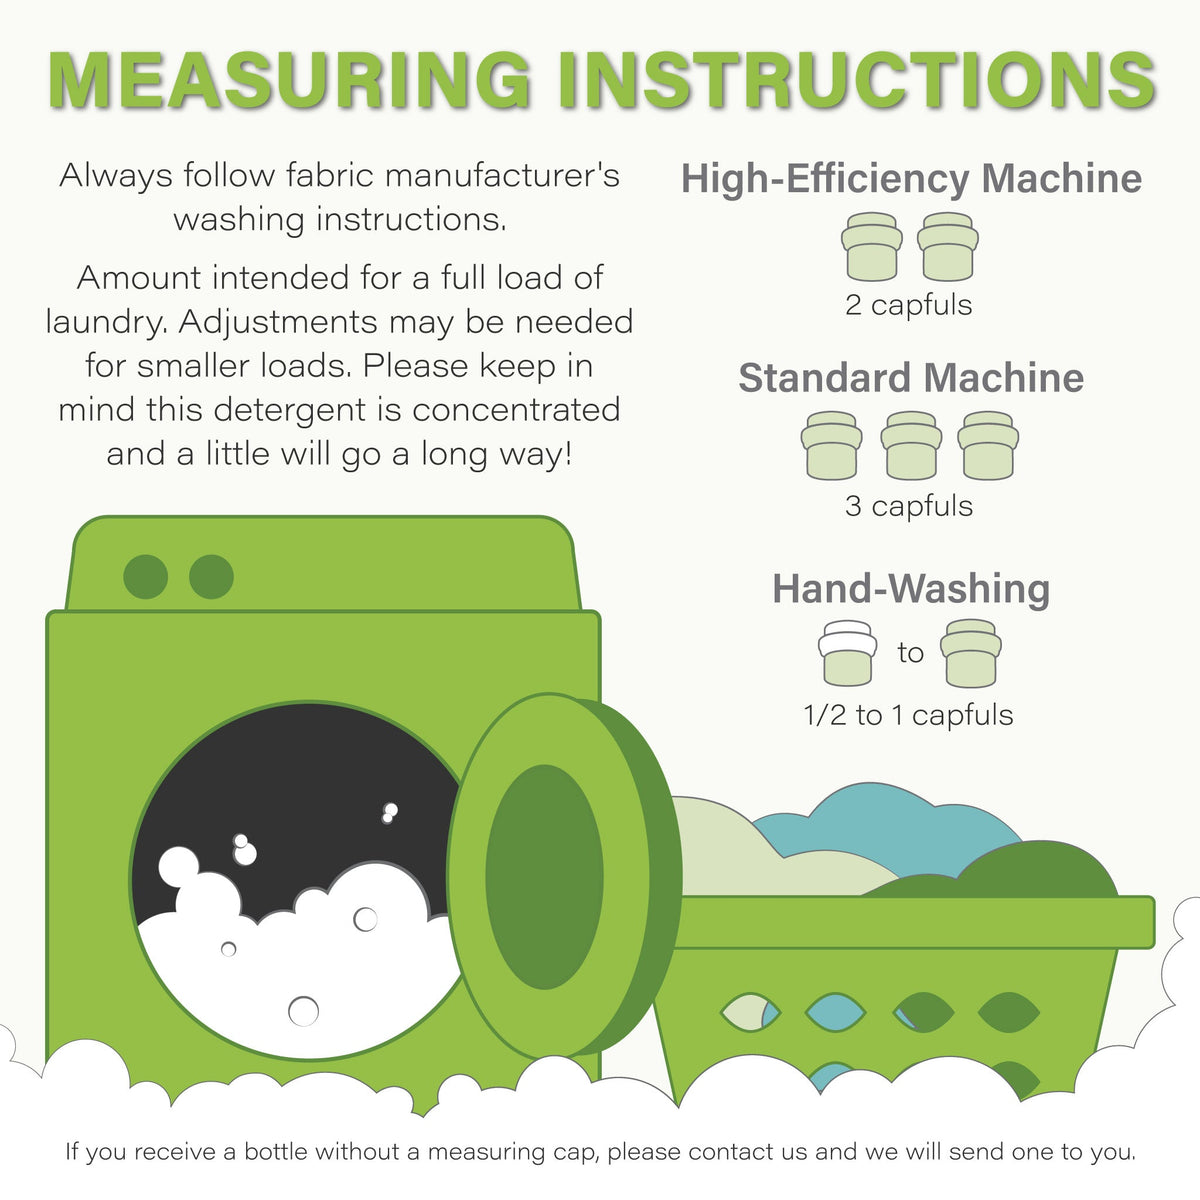 Follow These Washing Instructions for the Perfect Wash Every Time